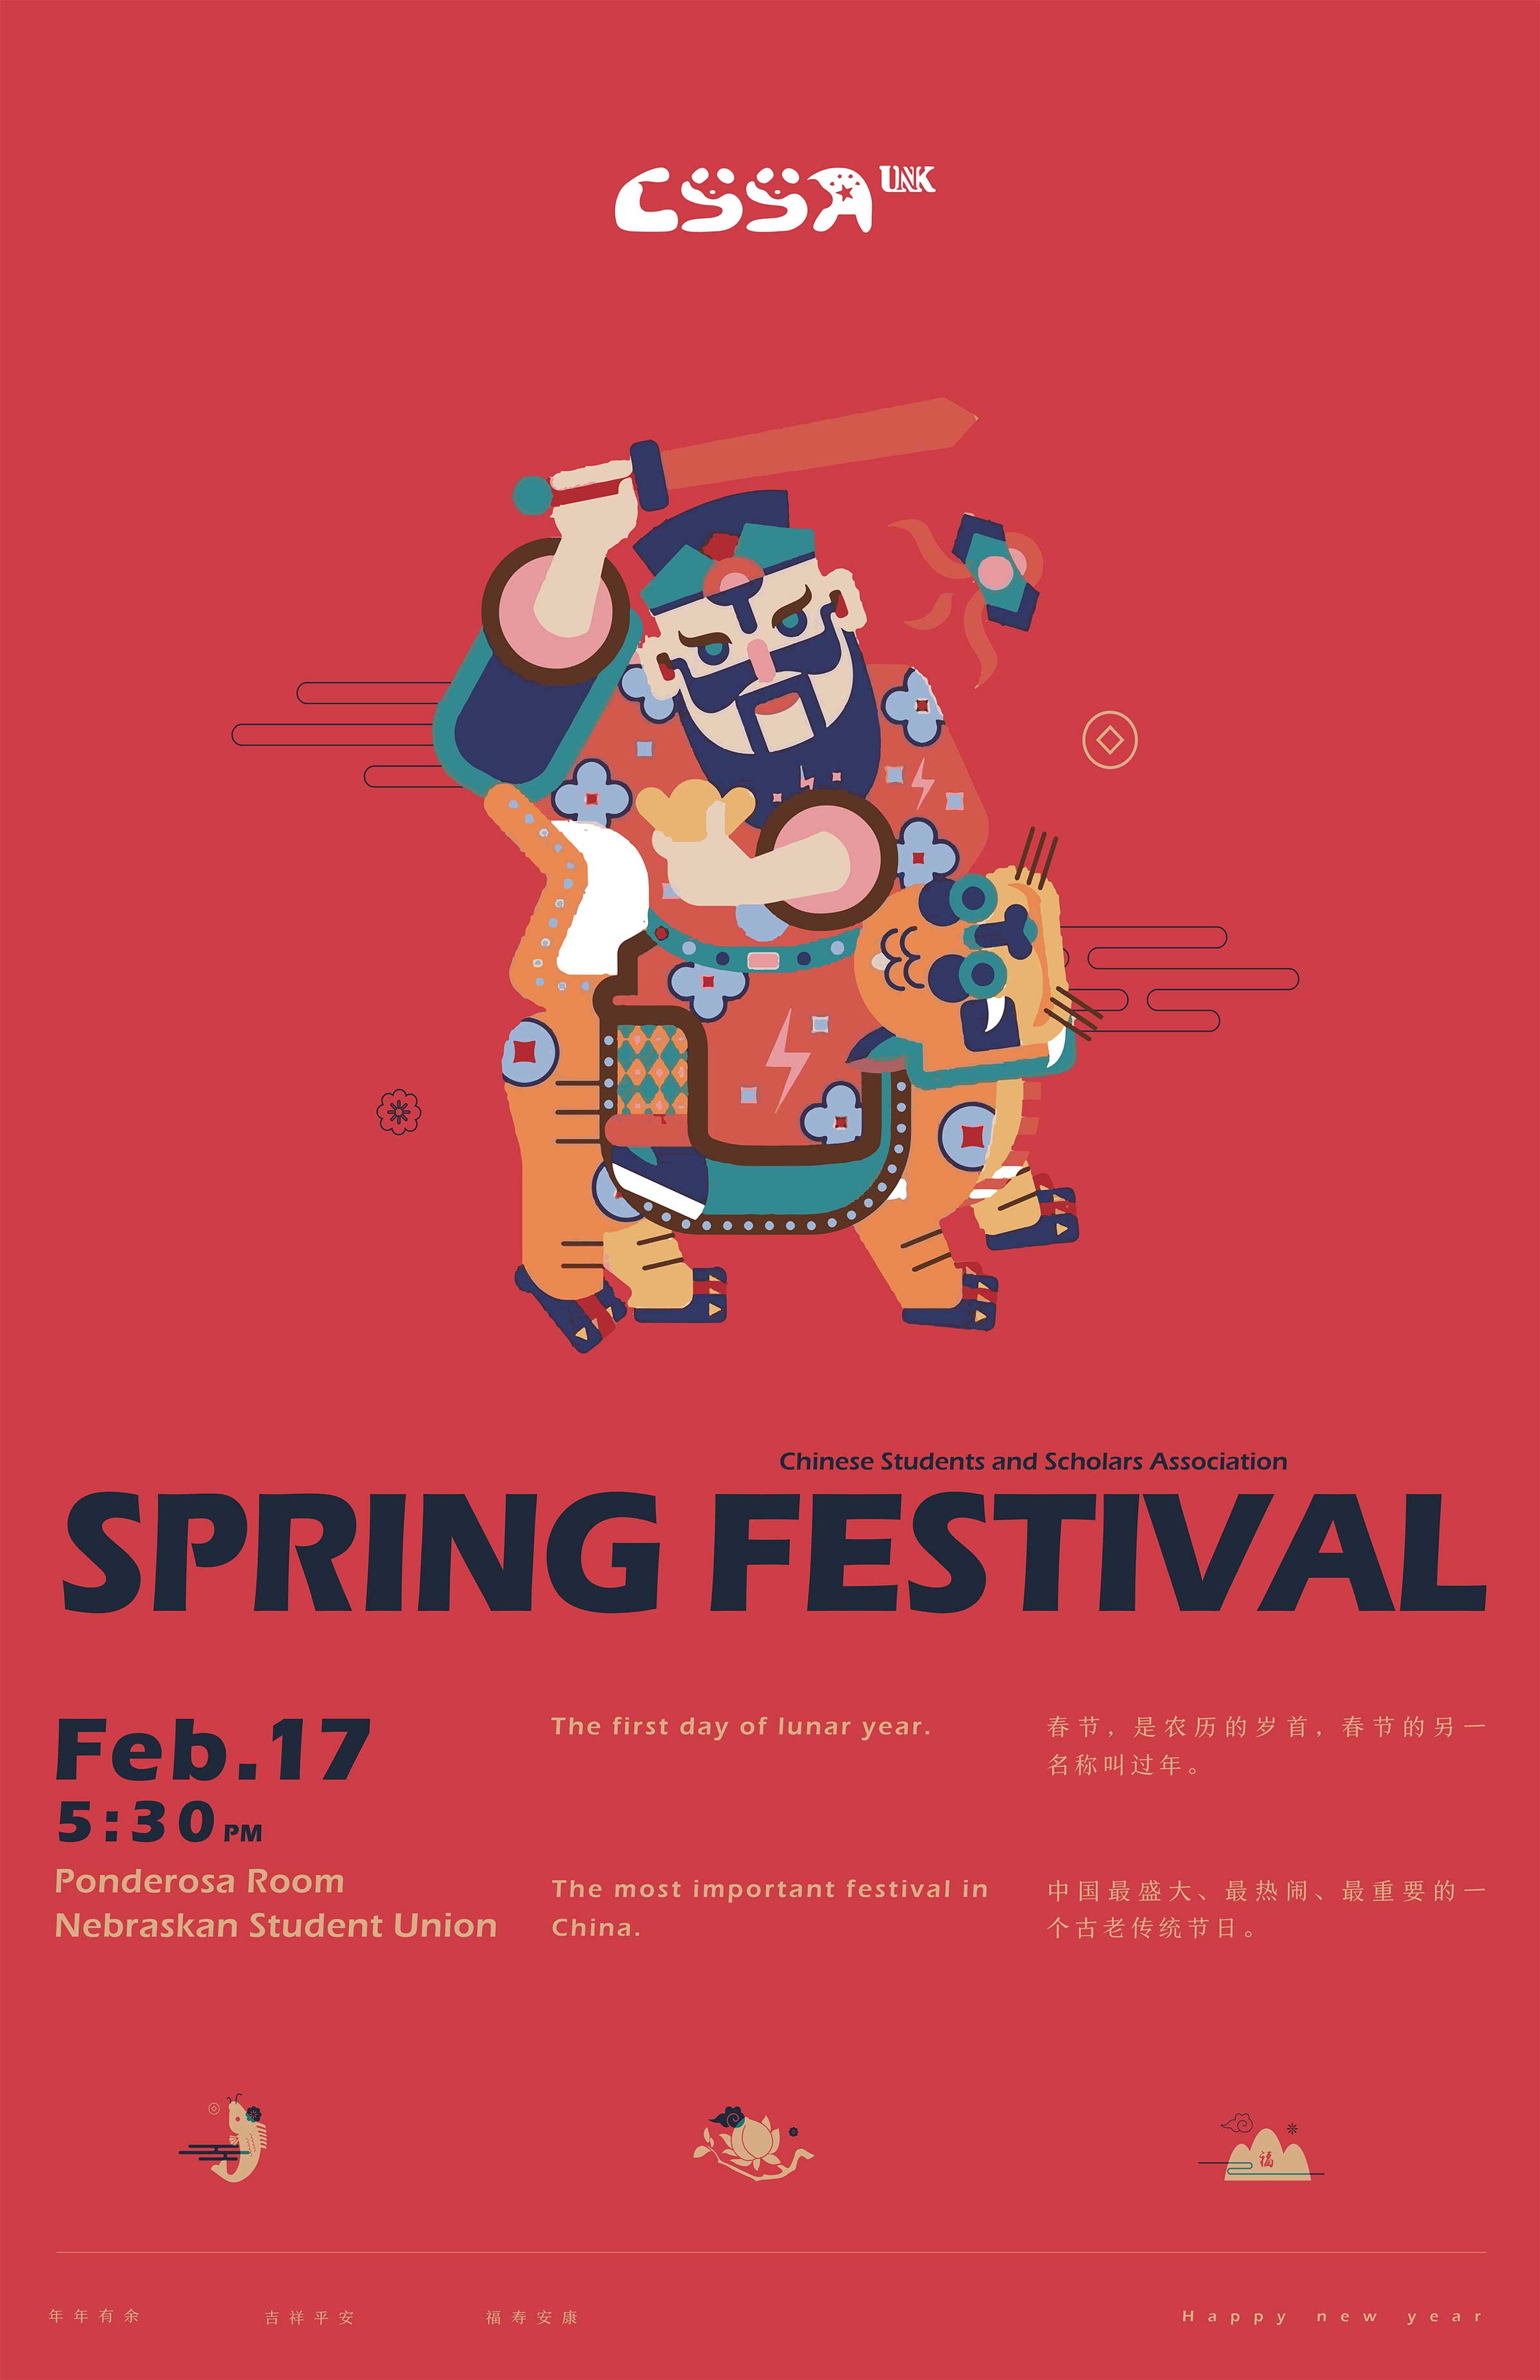 Chinese Spring Festival celebration Saturday at UNK